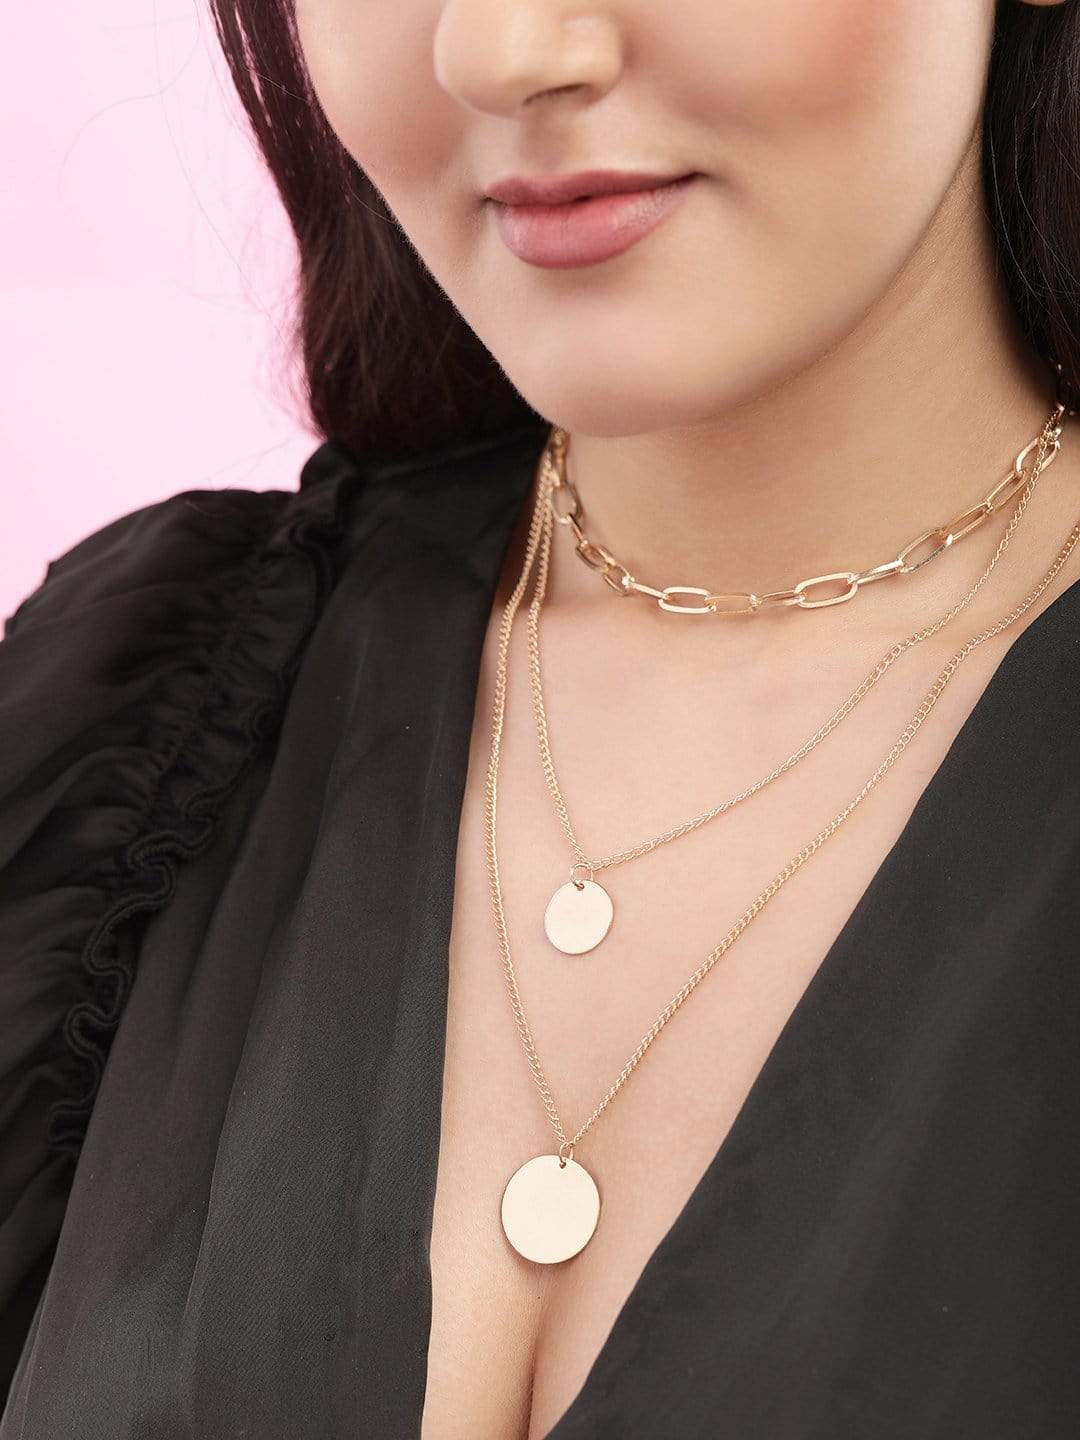 set of 2 necklaces gold plated layered and round pendant gold plated interlink chain necklaces